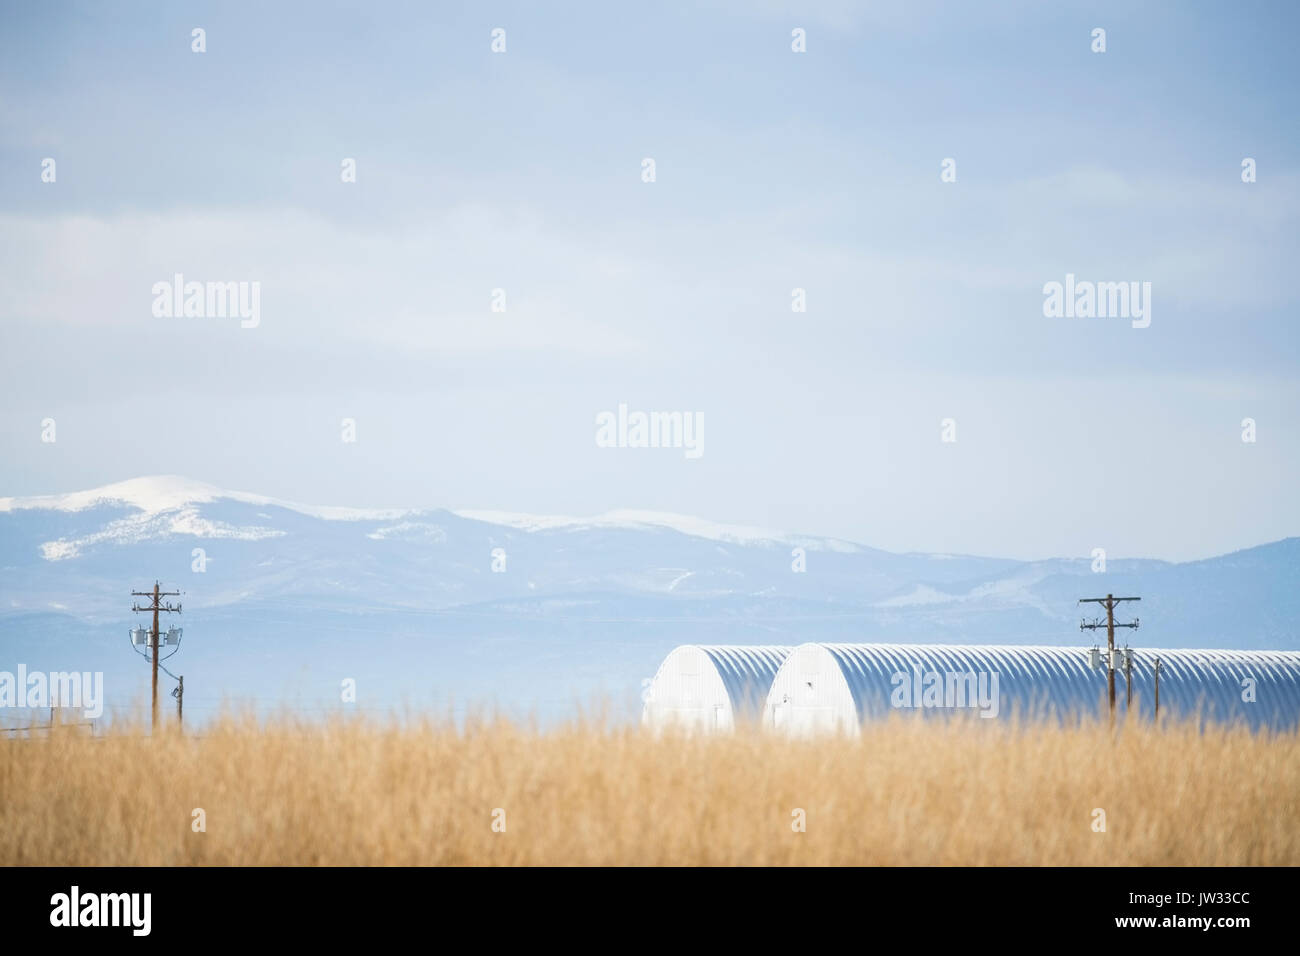 USA, Colorado, Agricultural landscape with snowcapped mountains in background Stock Photo